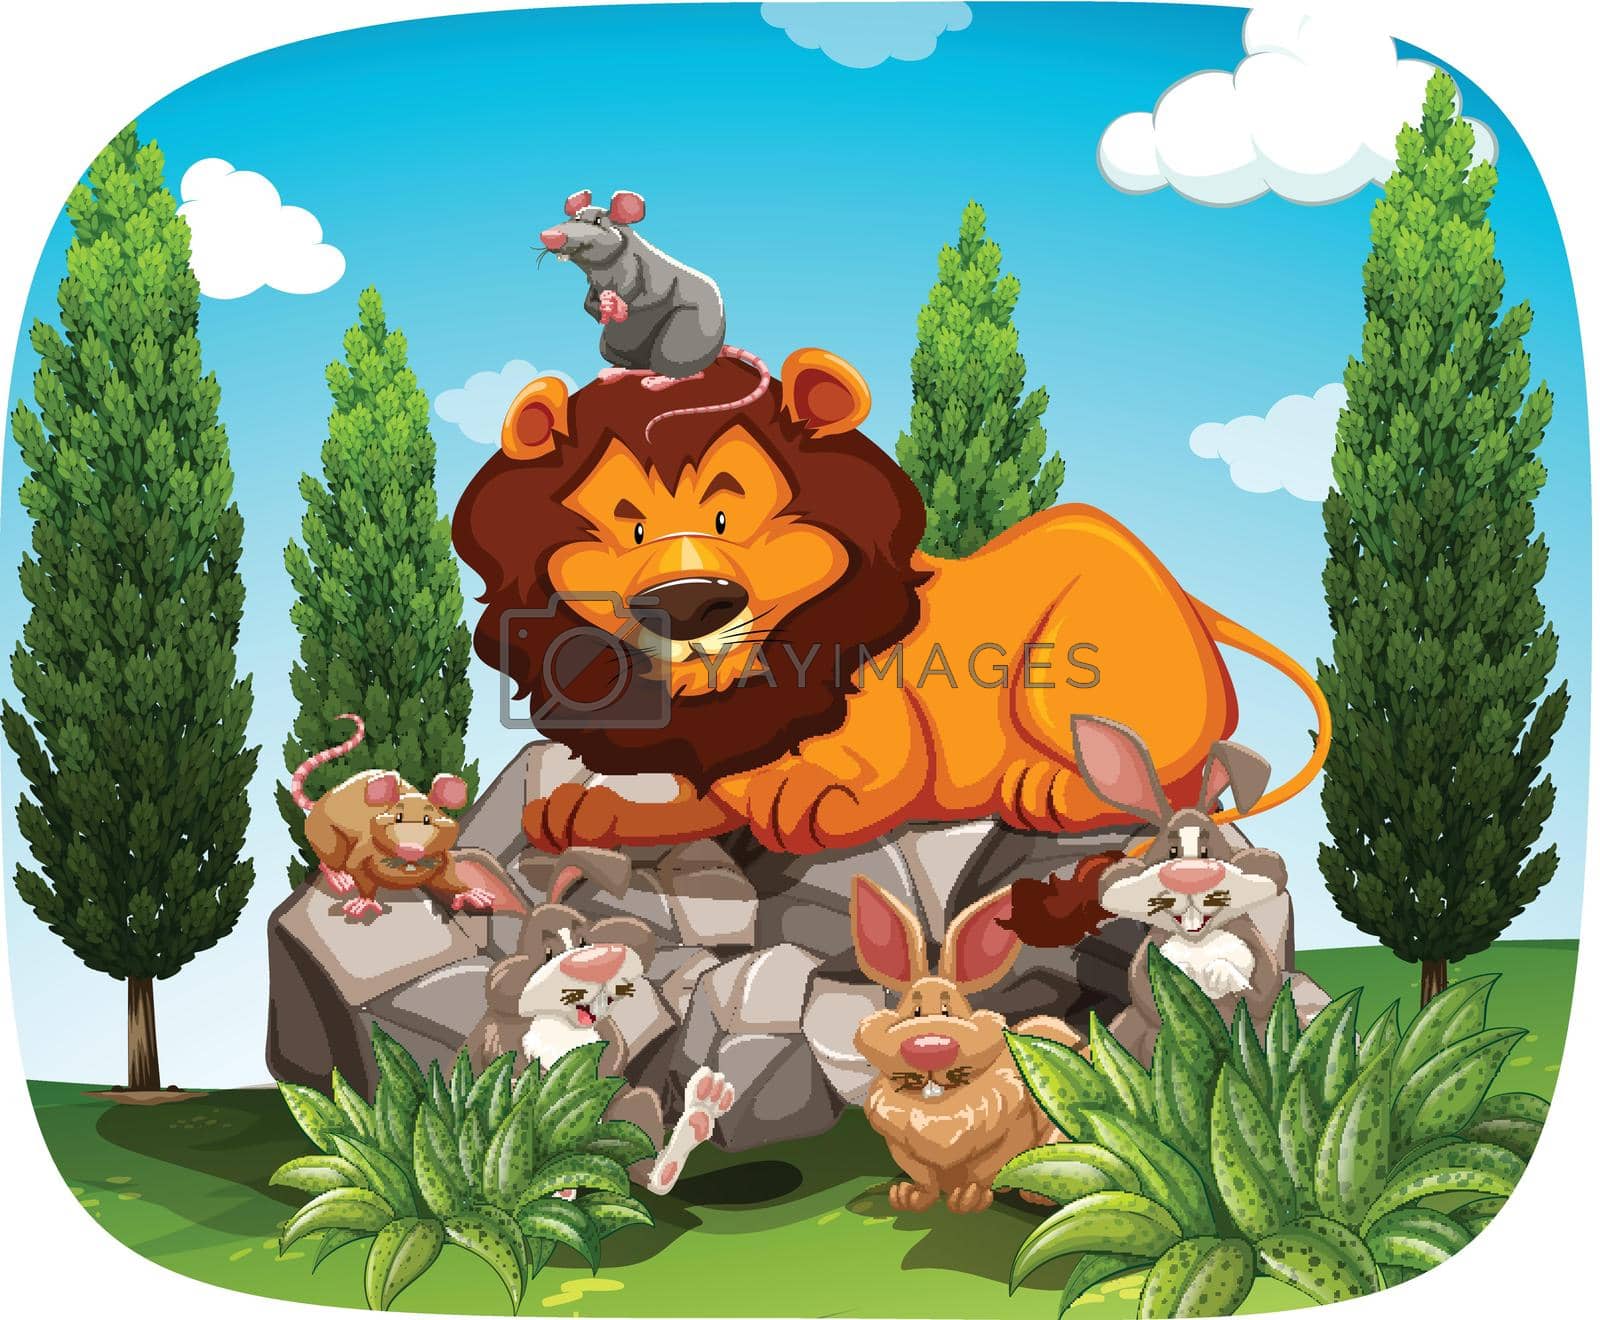 Poster of a mouse sitting on lion's head and few rabbits around